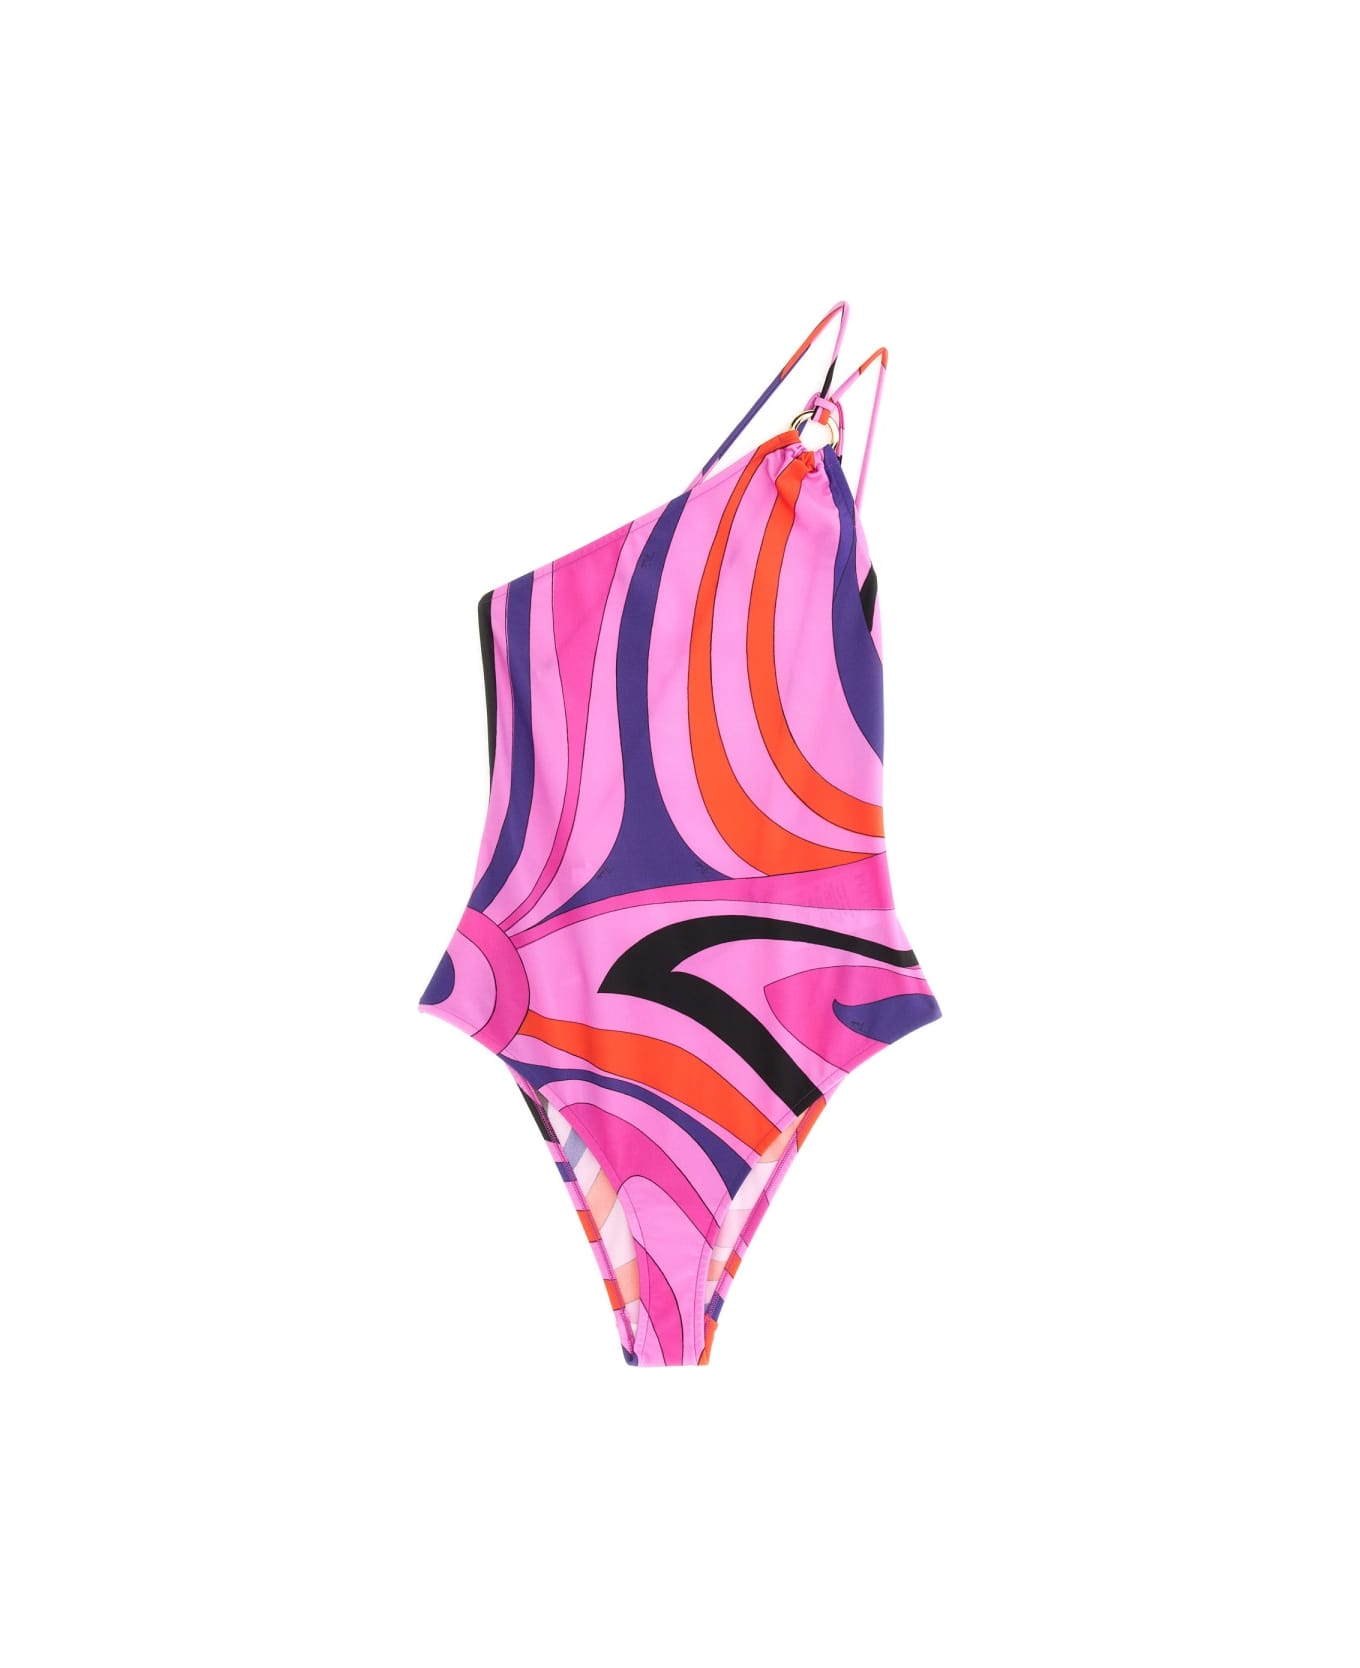 Pucci Full Costume - PINK